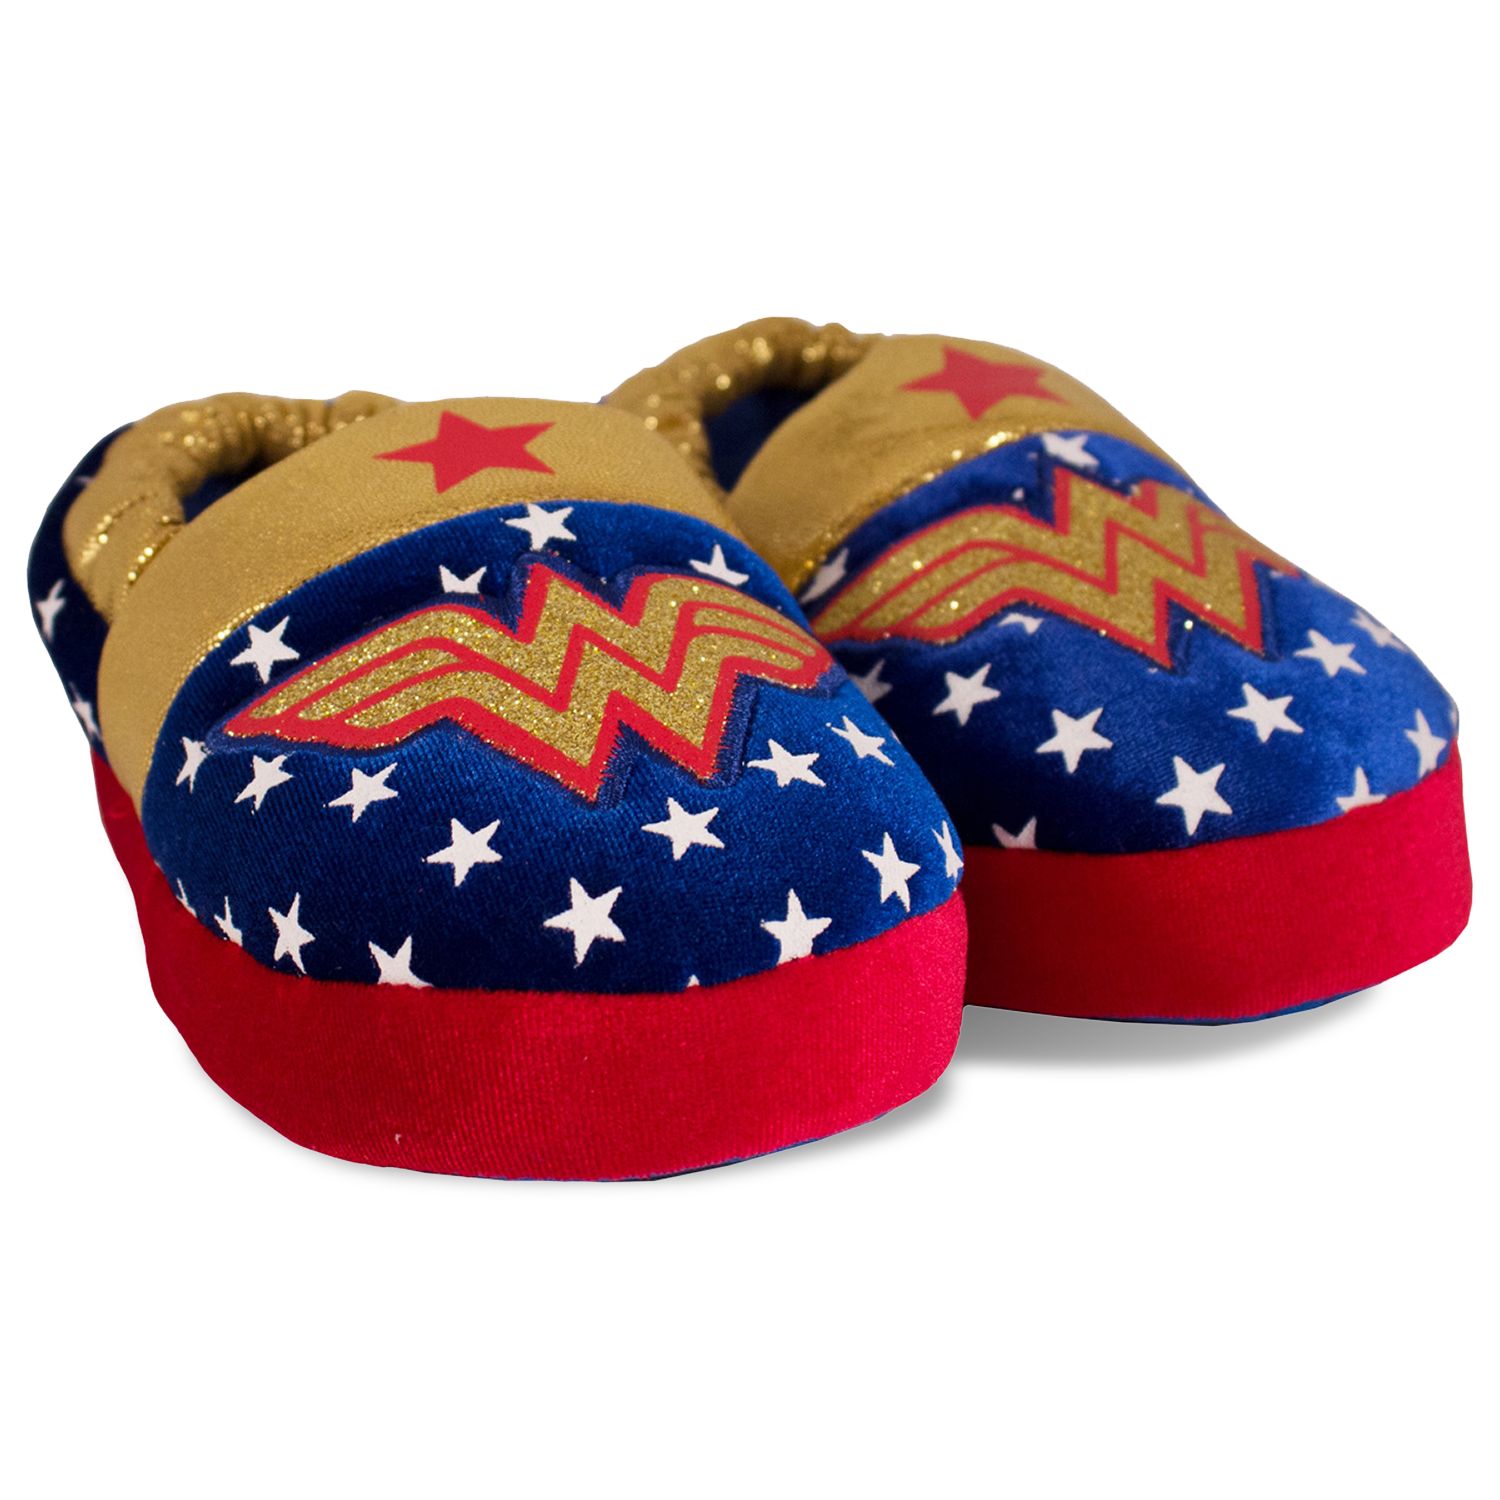 wonder woman baby shoes